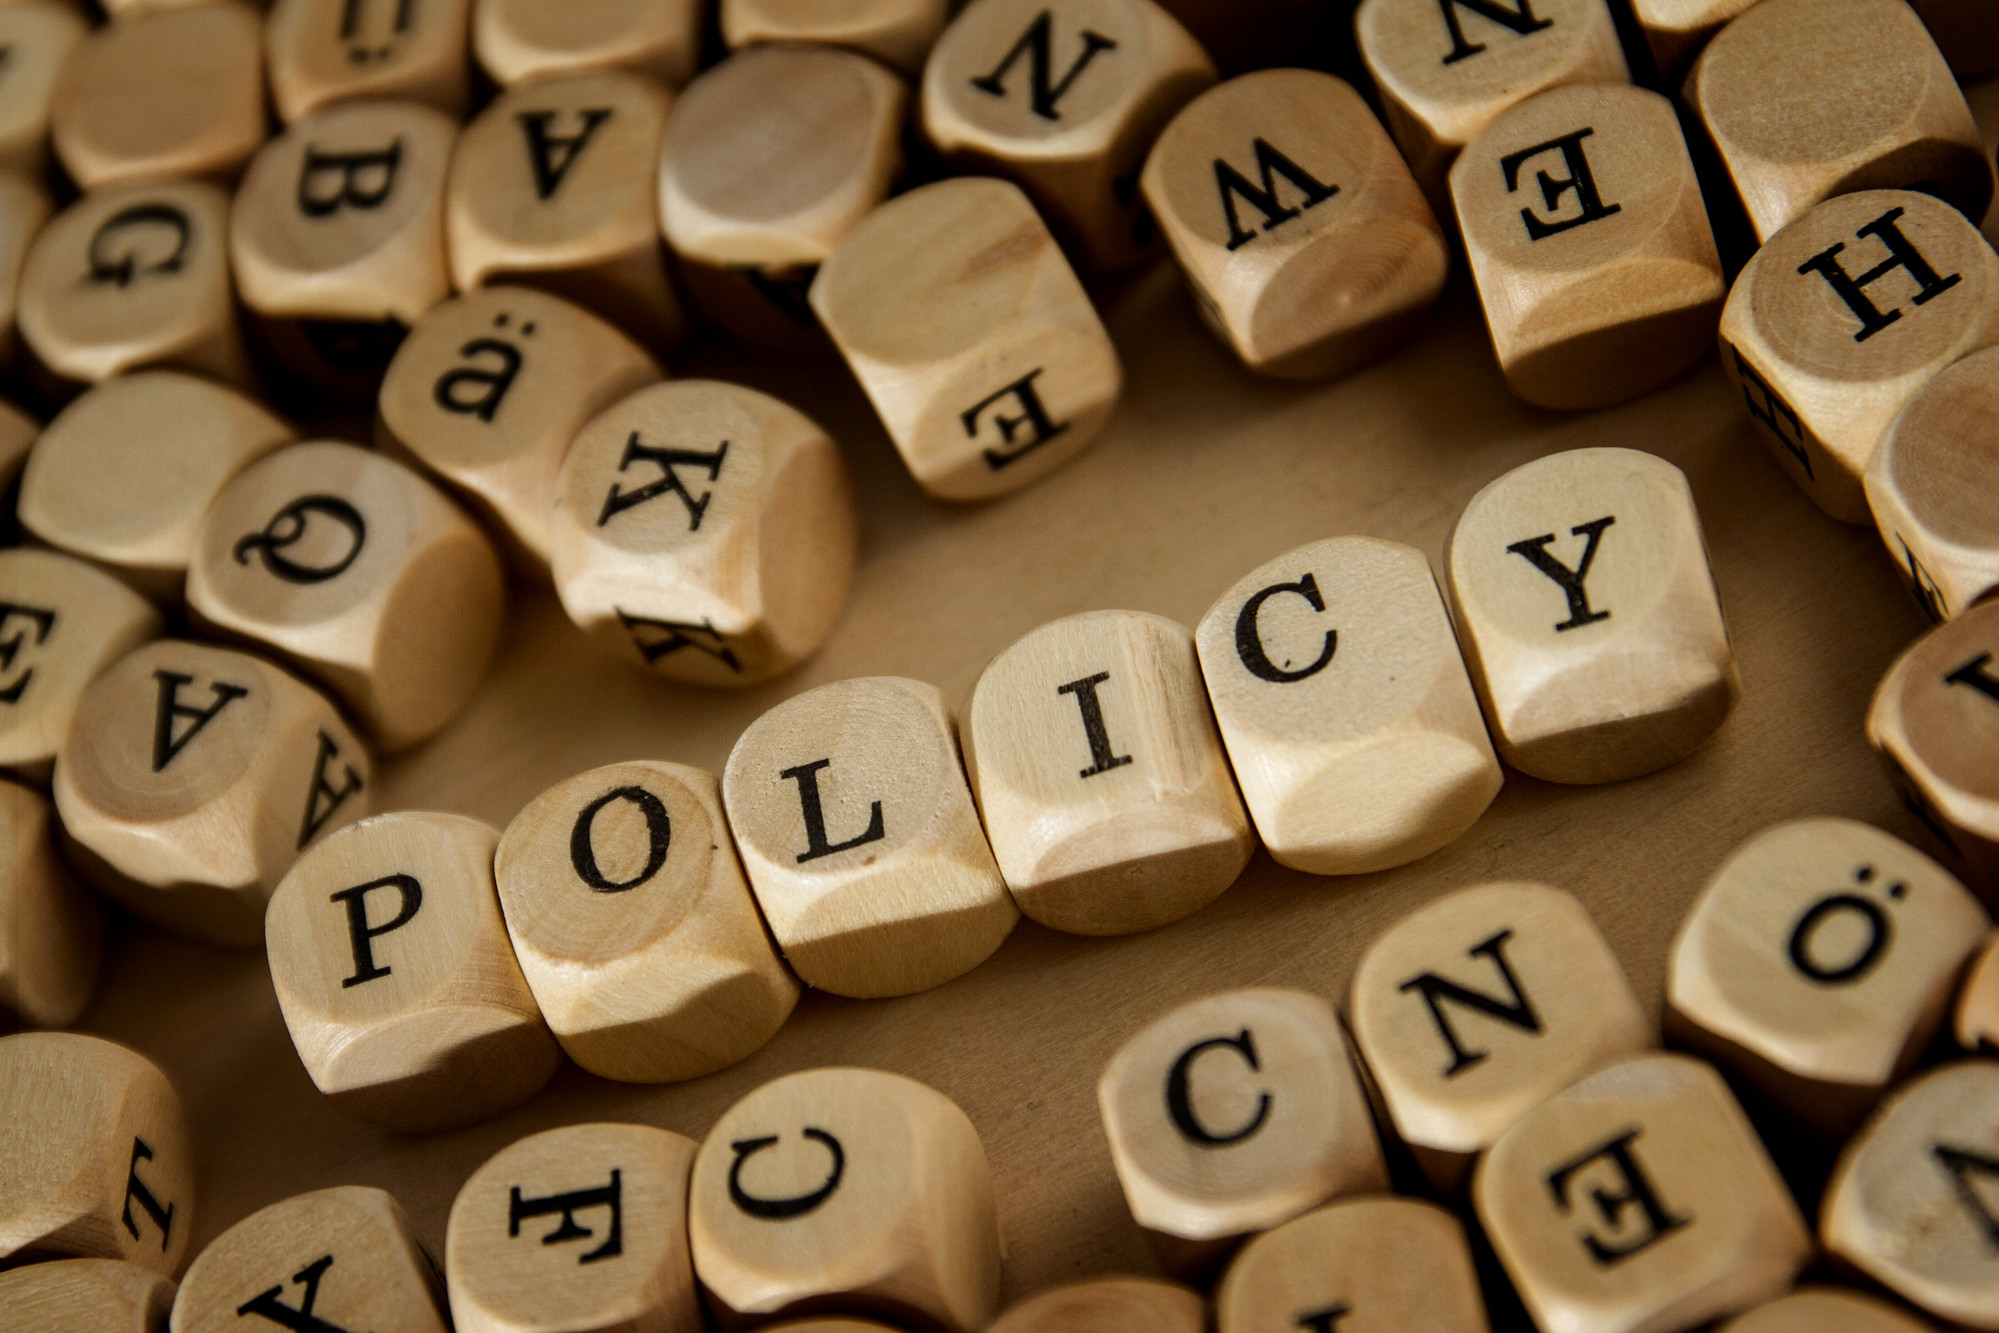 The word Policy written in lettered cubes